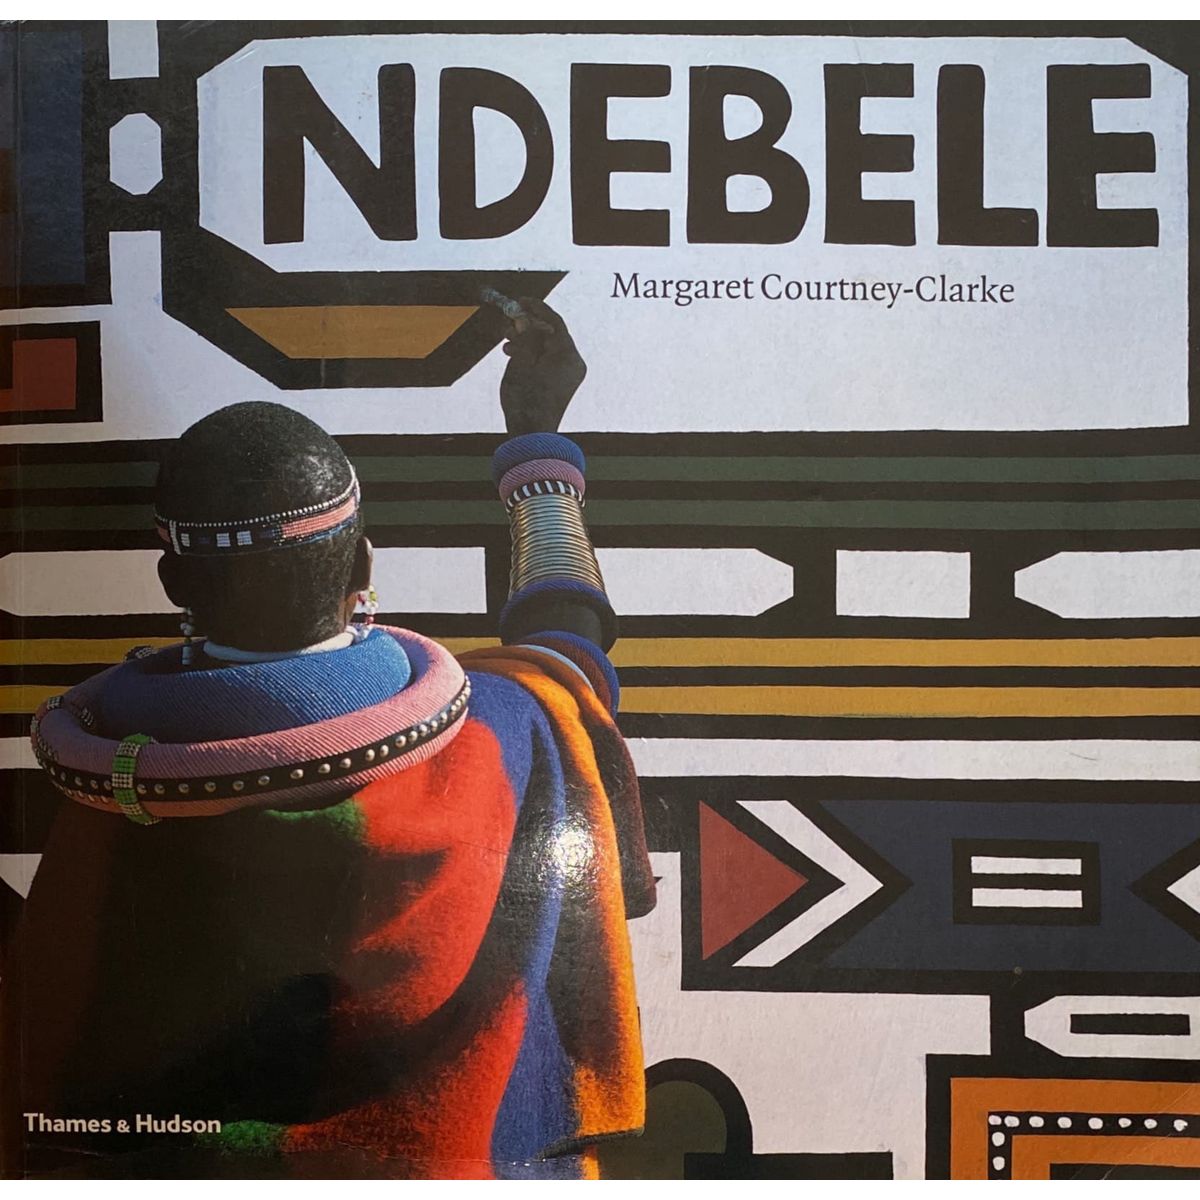 ISBN: 9780500283875 / 0500283877 - Ndebele: The Art of an African Tribe by Margaret Courtney-Clarke [2002]